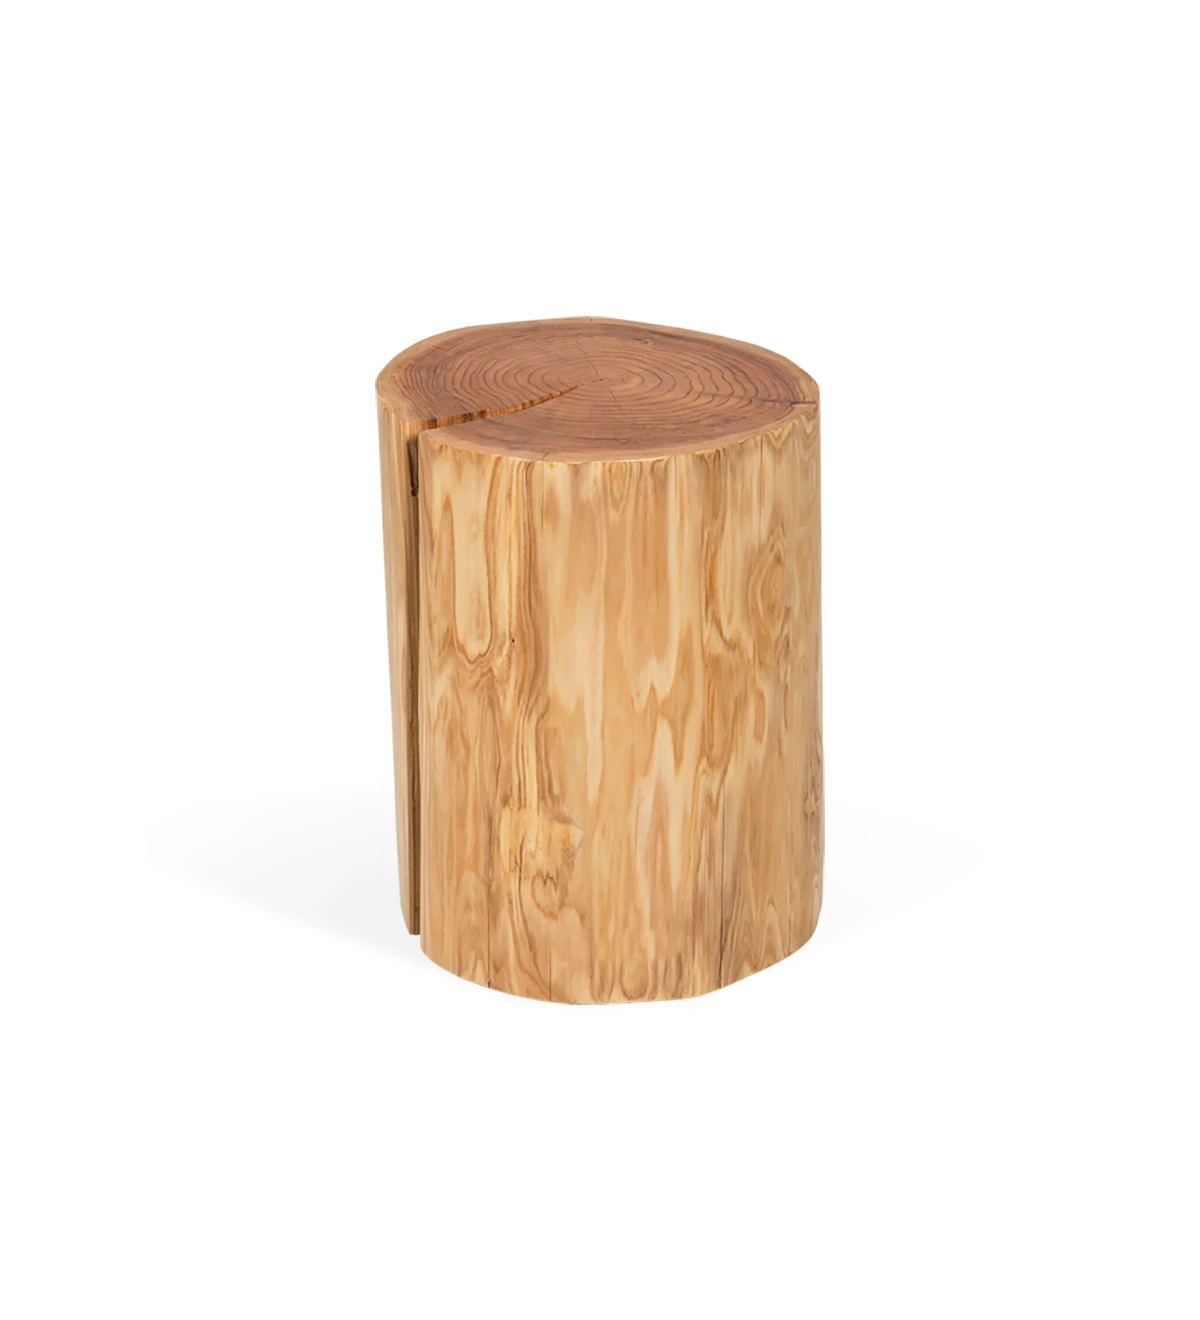 Trunk side table in natural cryptomeria wood.